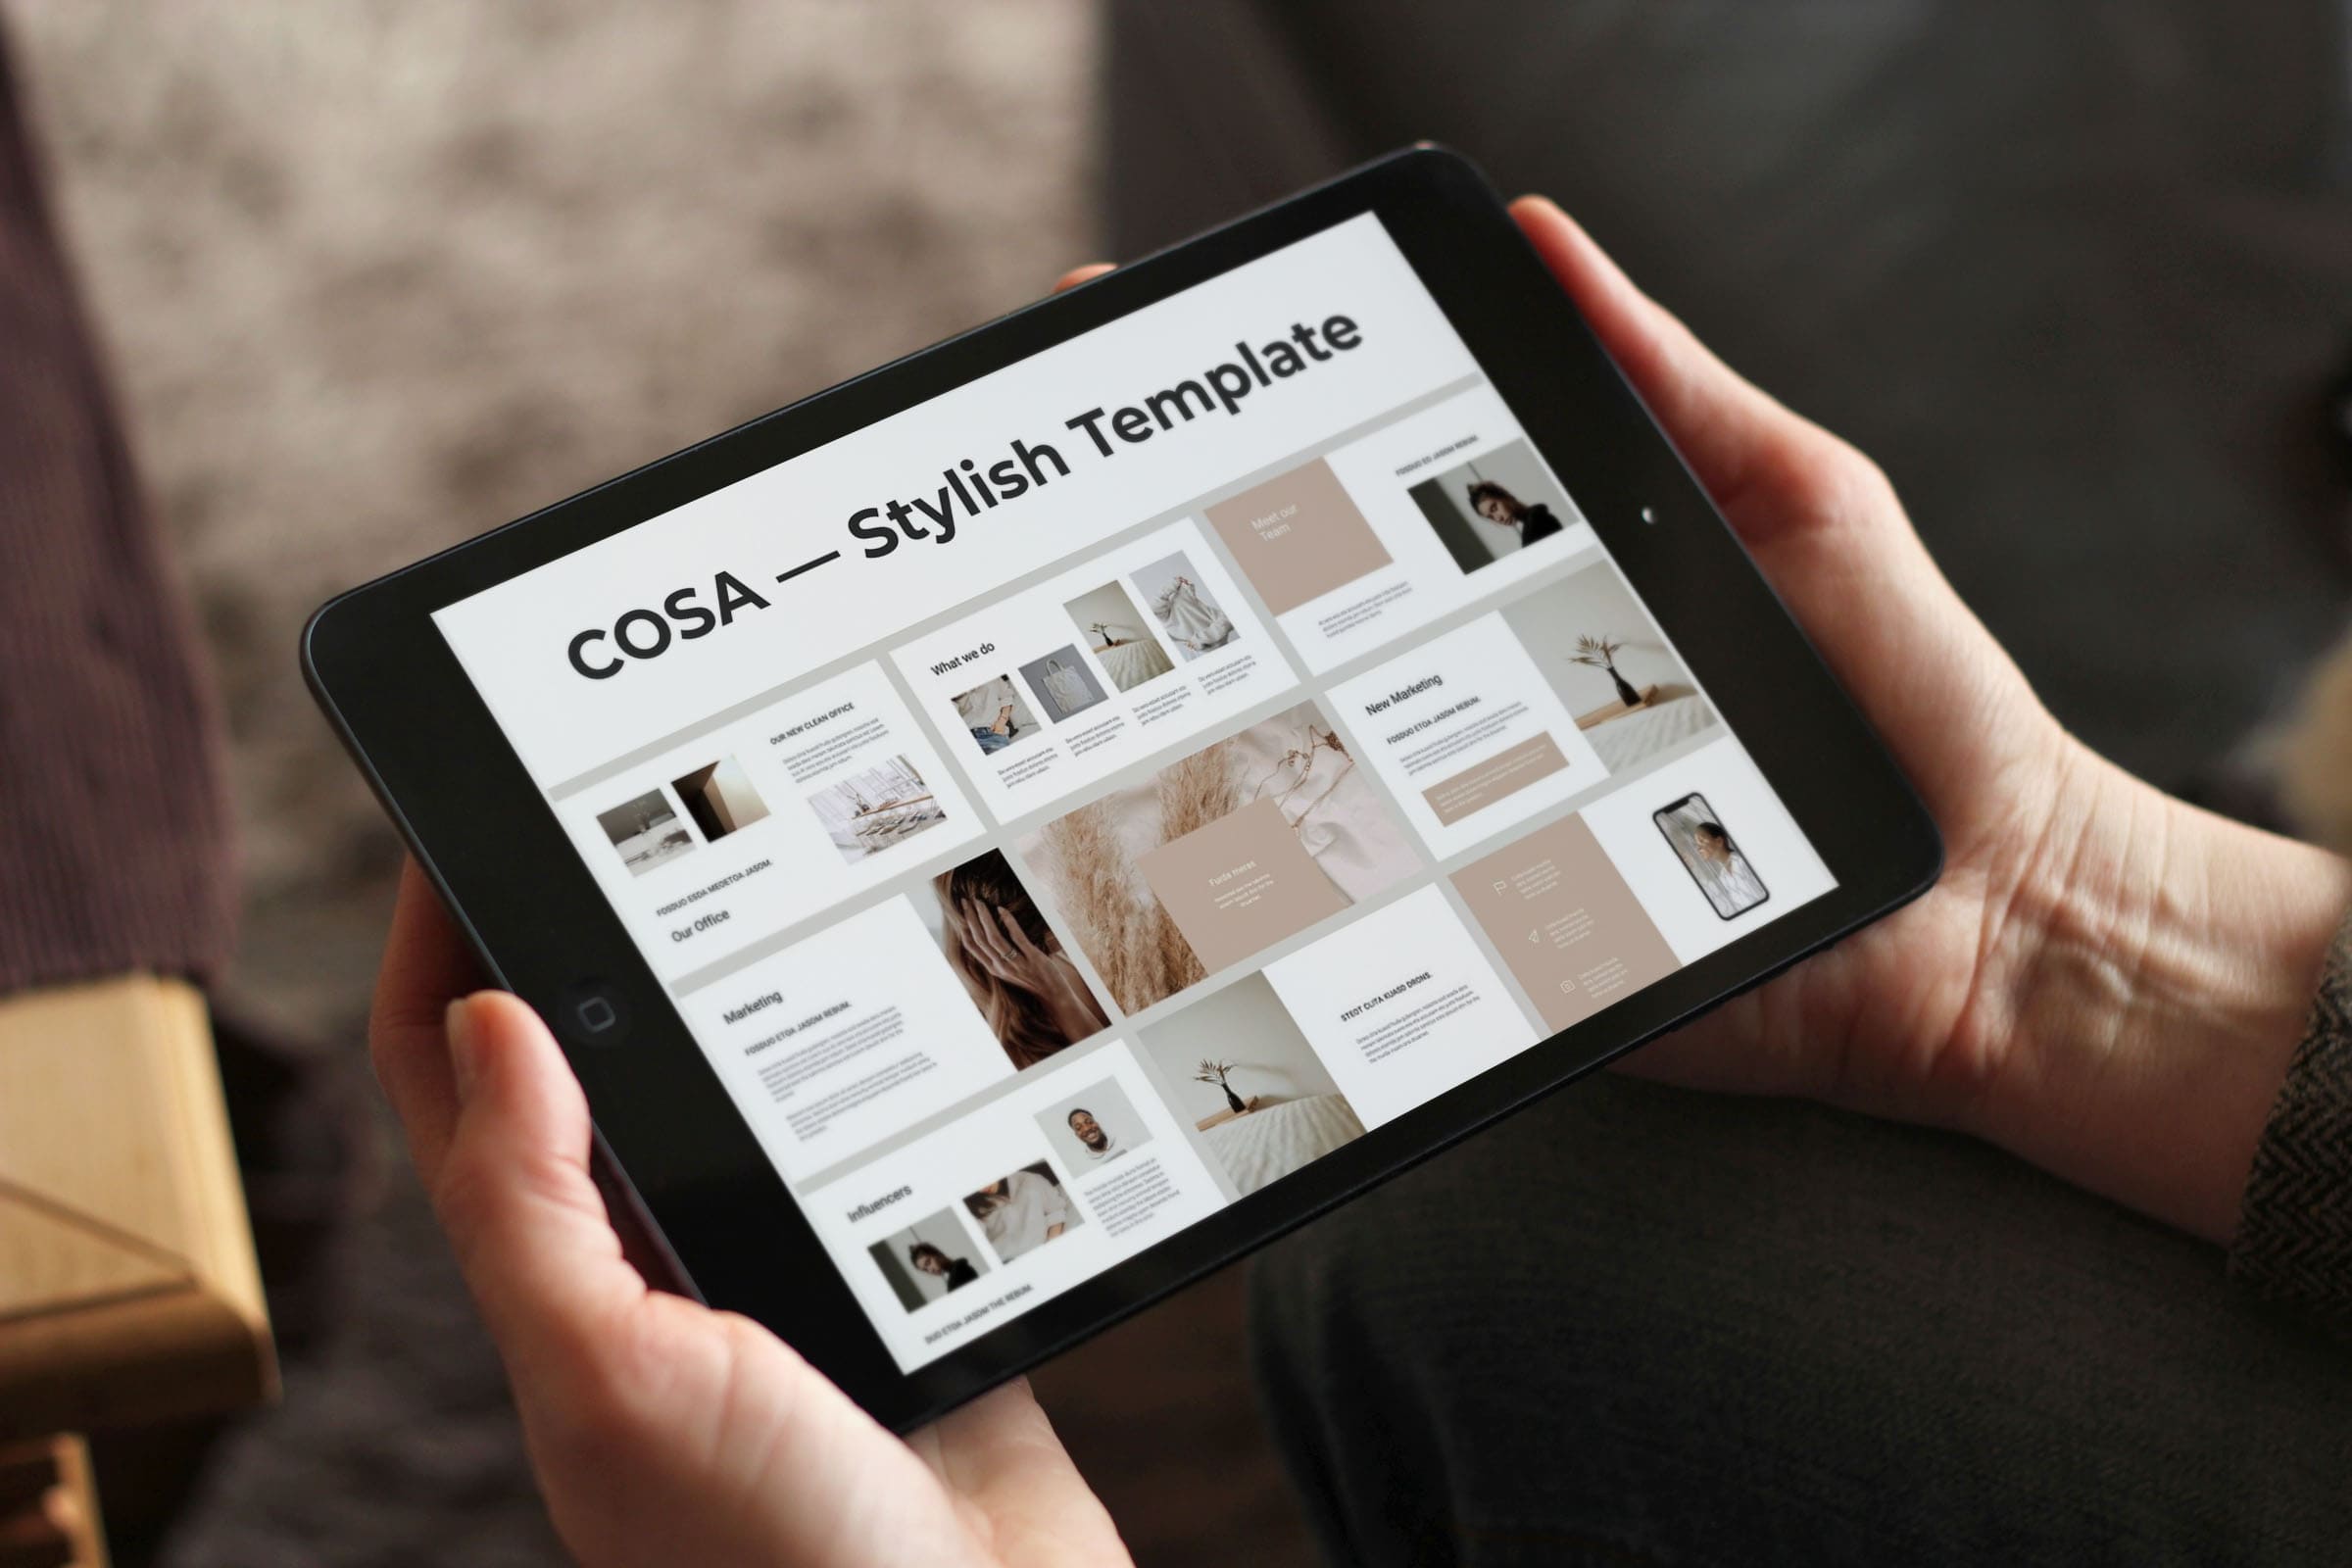 Tablet option of COSA - Keynote Style Template.